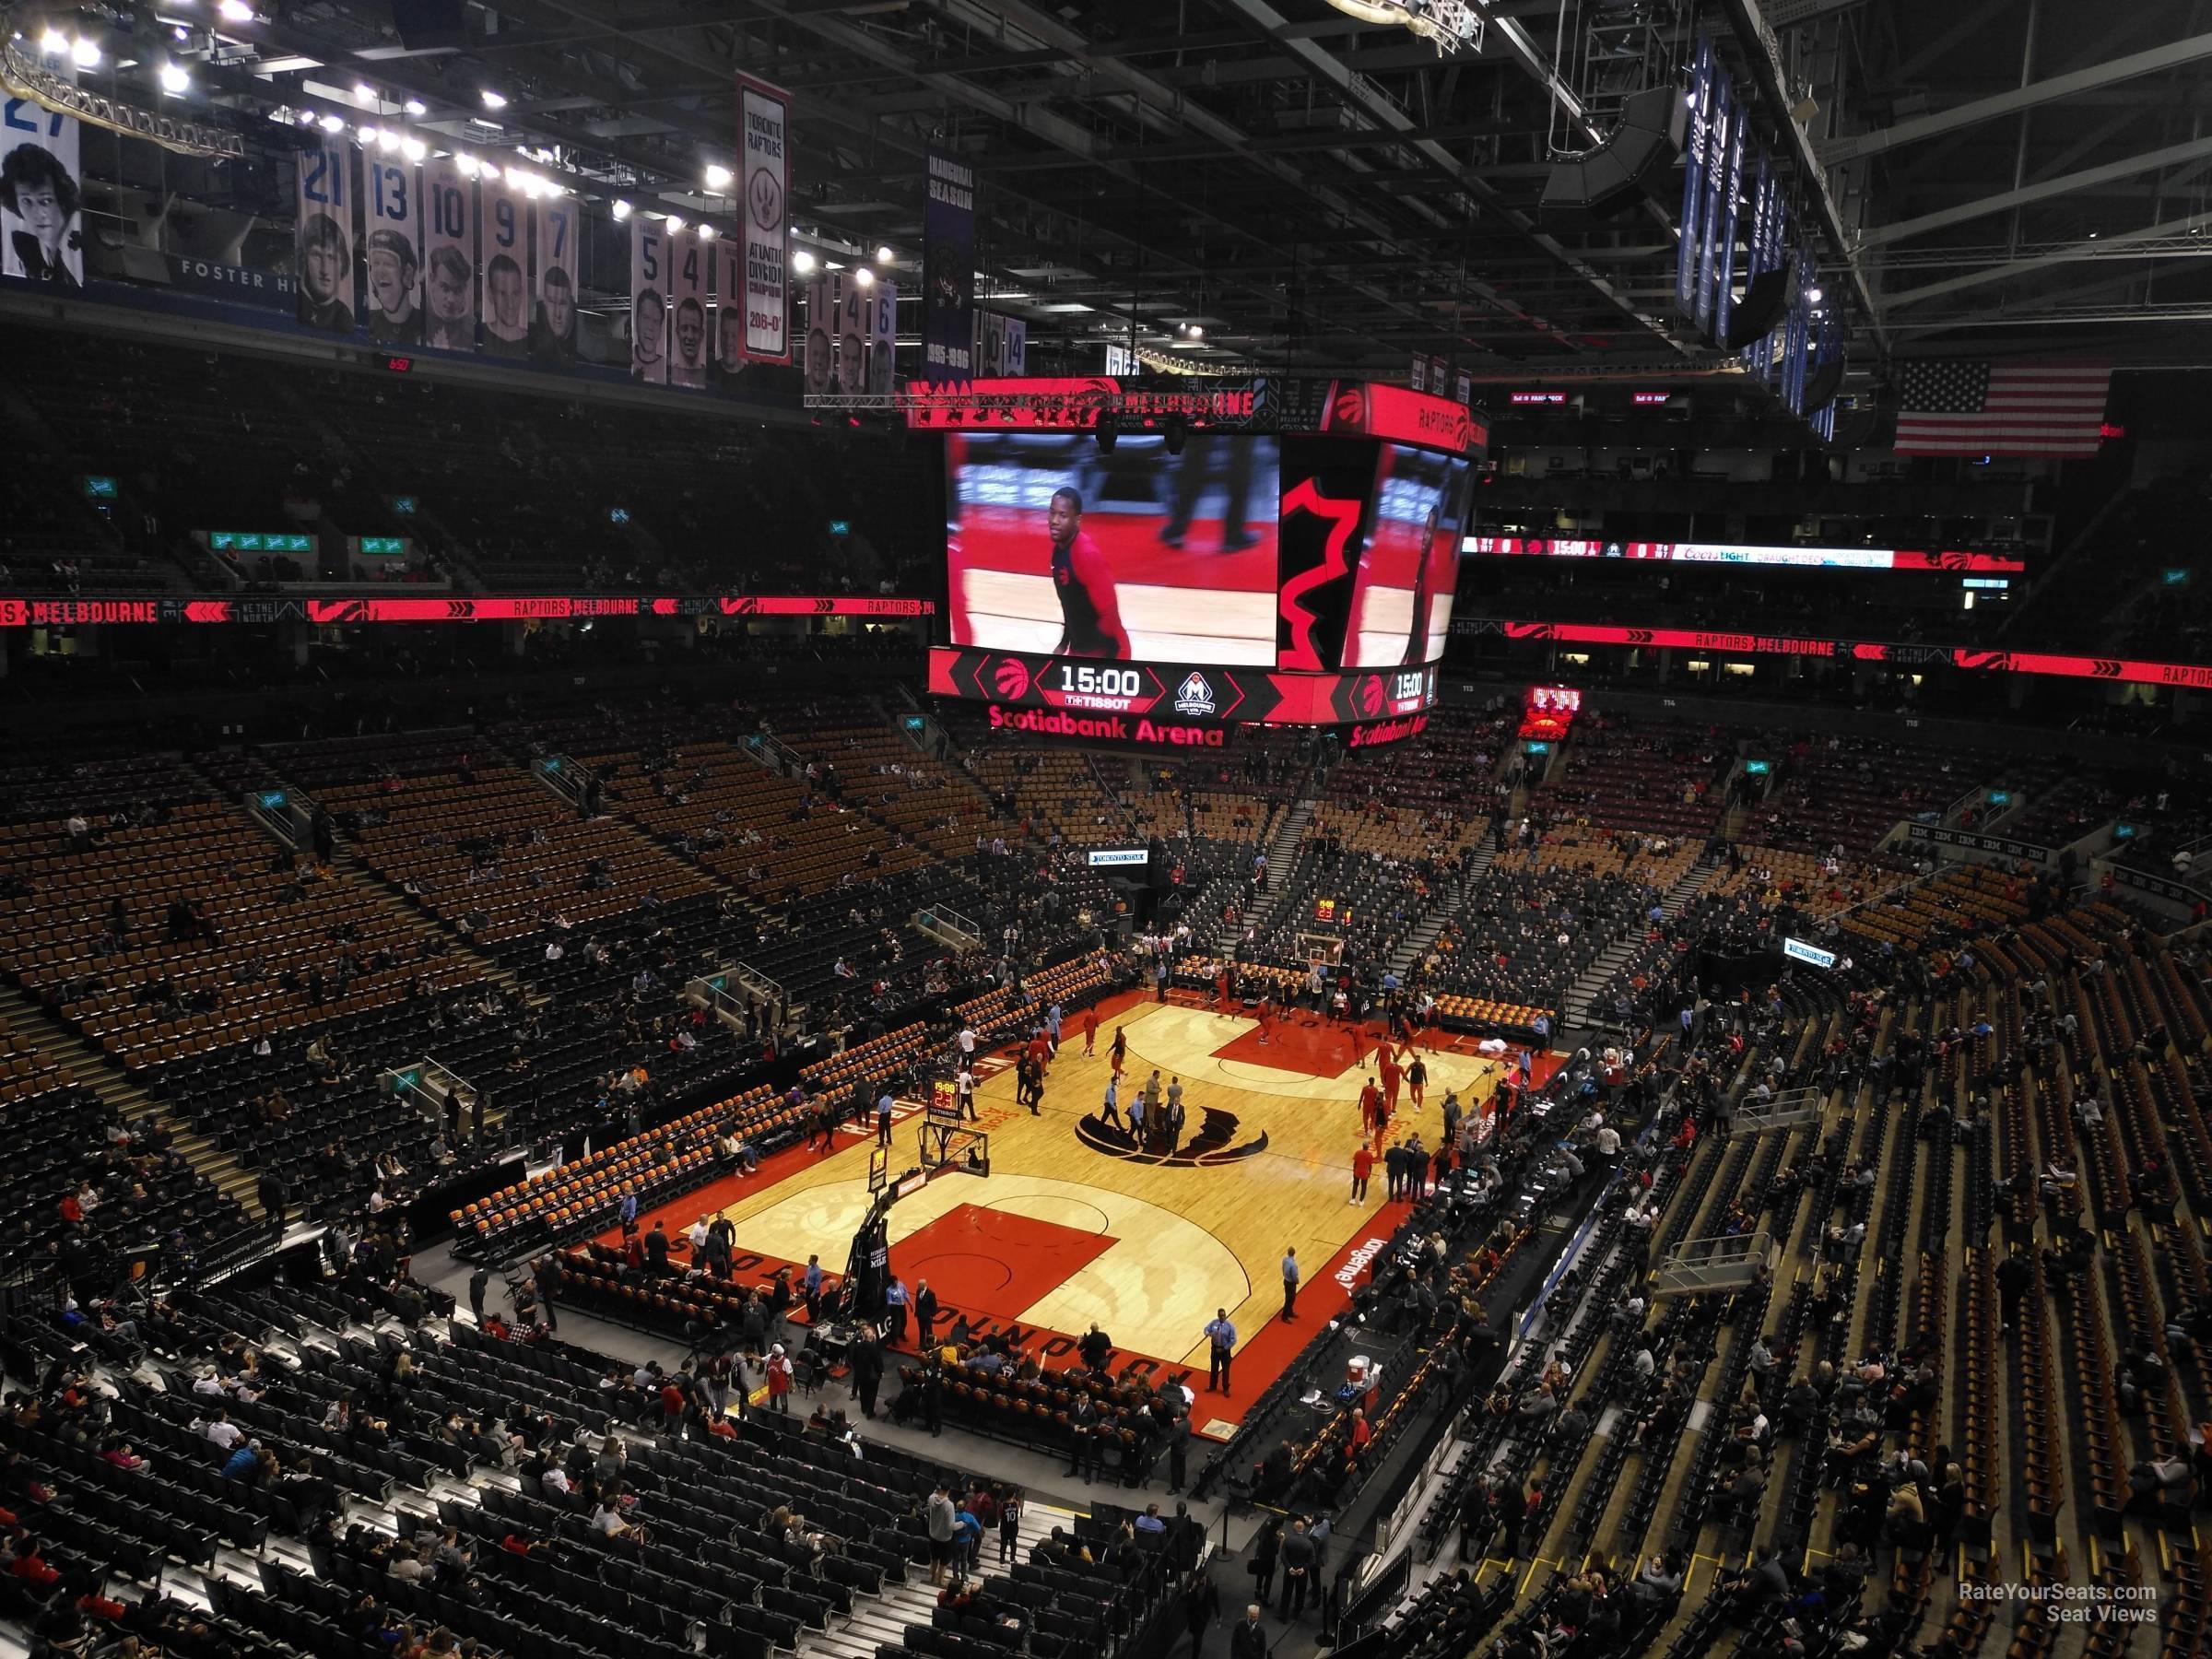 section 301, row 7 seat view  for basketball - scotiabank arena